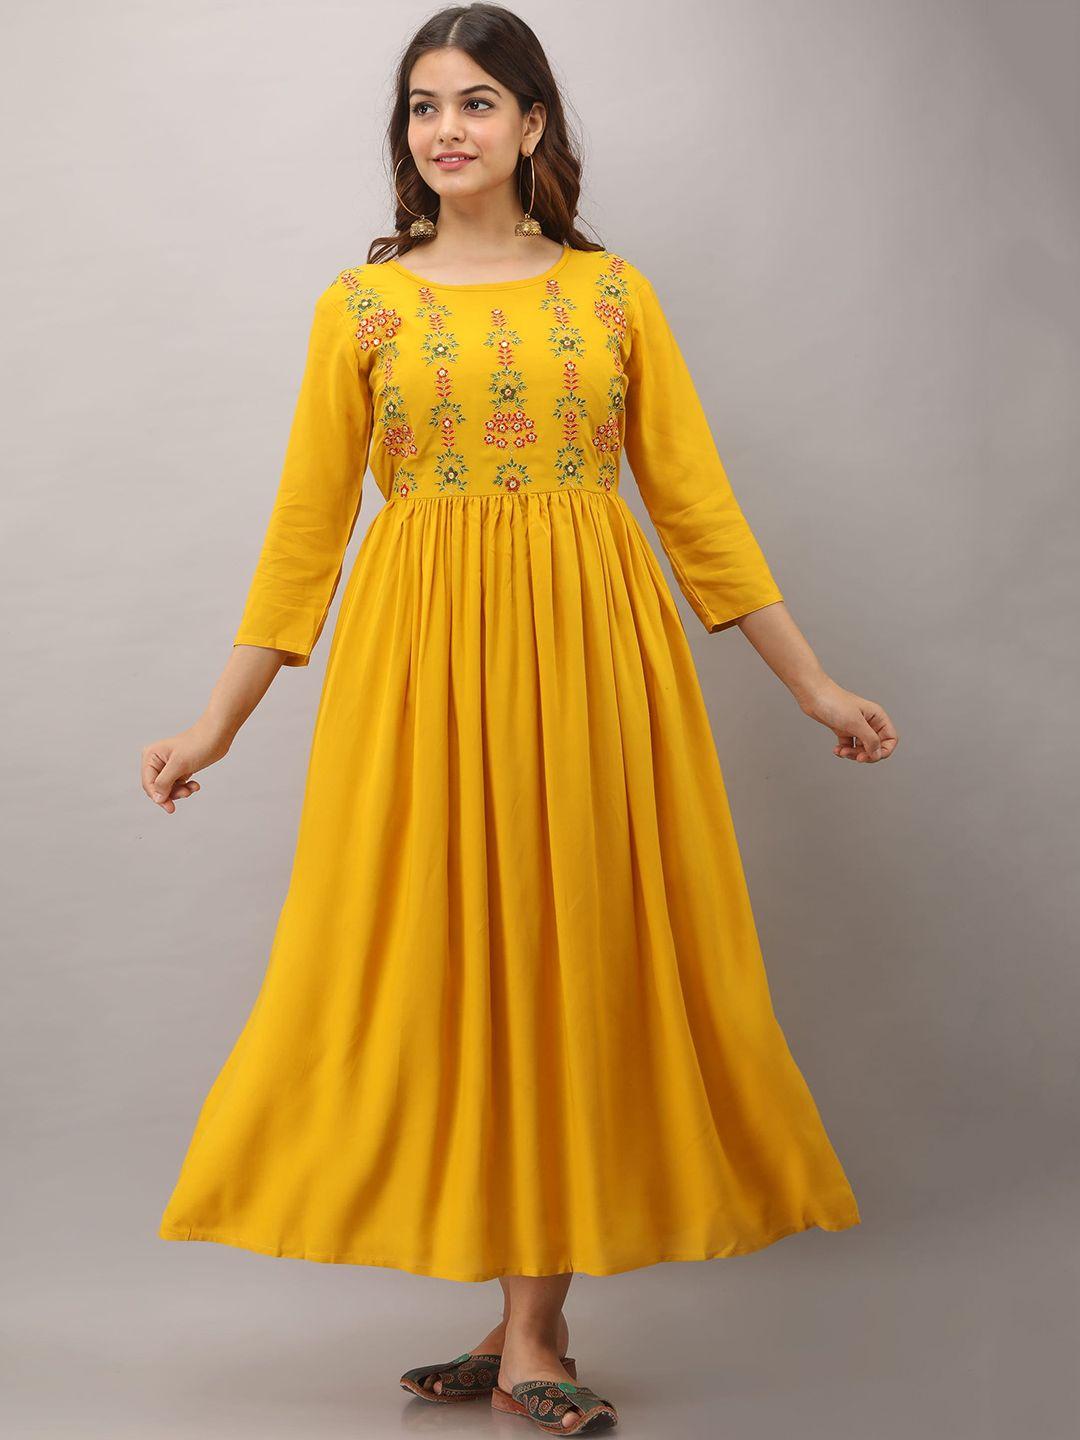 women touch yellow ethnic motifs embroidered ethnic a-line maxi dress